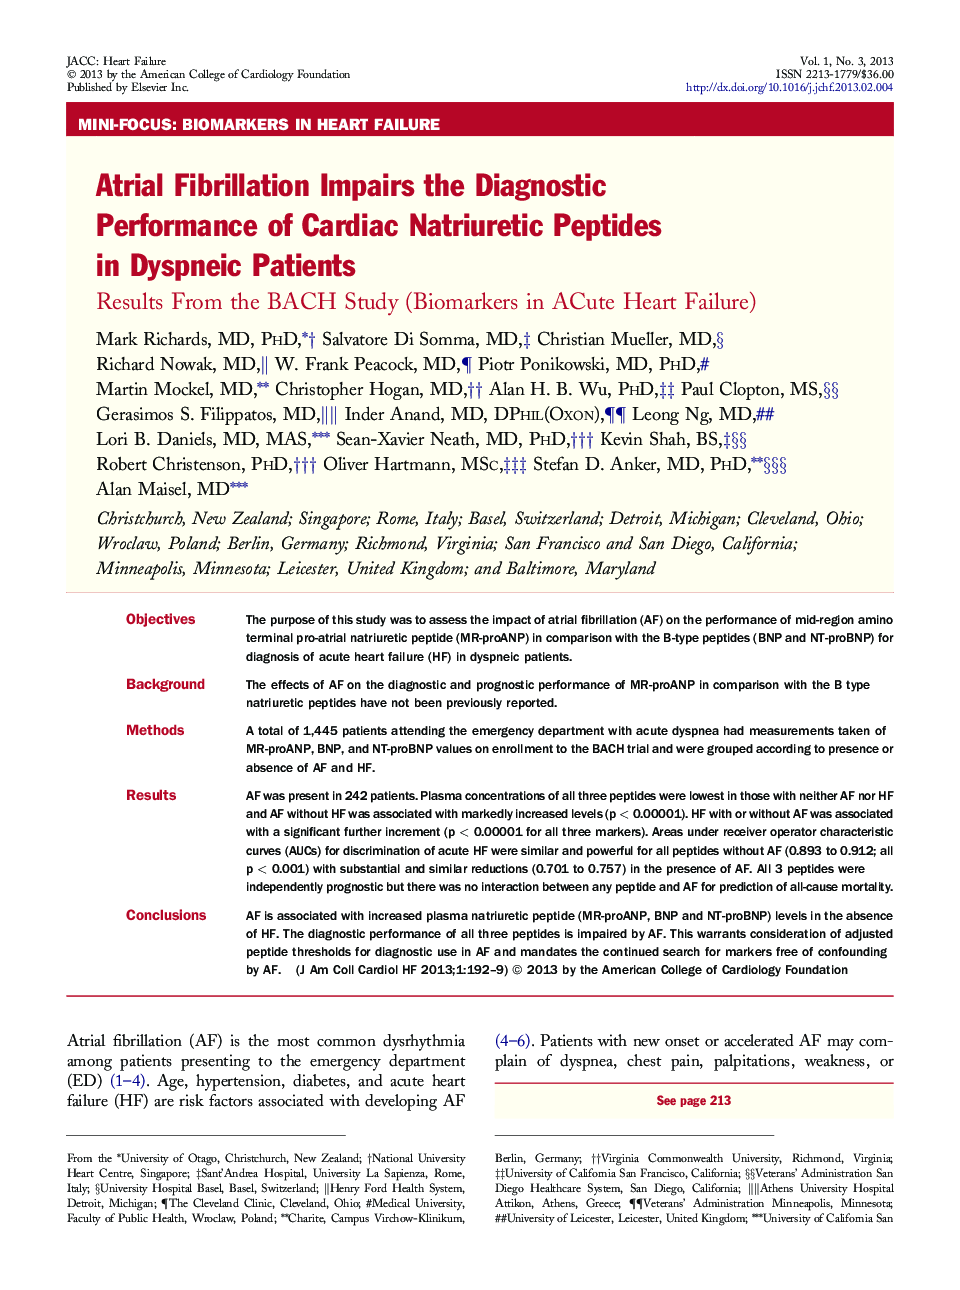 Atrial Fibrillation Impairs the Diagnostic Performance of Cardiac Natriuretic Peptides in Dyspneic Patients : Results From the BACH Study (Biomarkers in ACute Heart Failure)